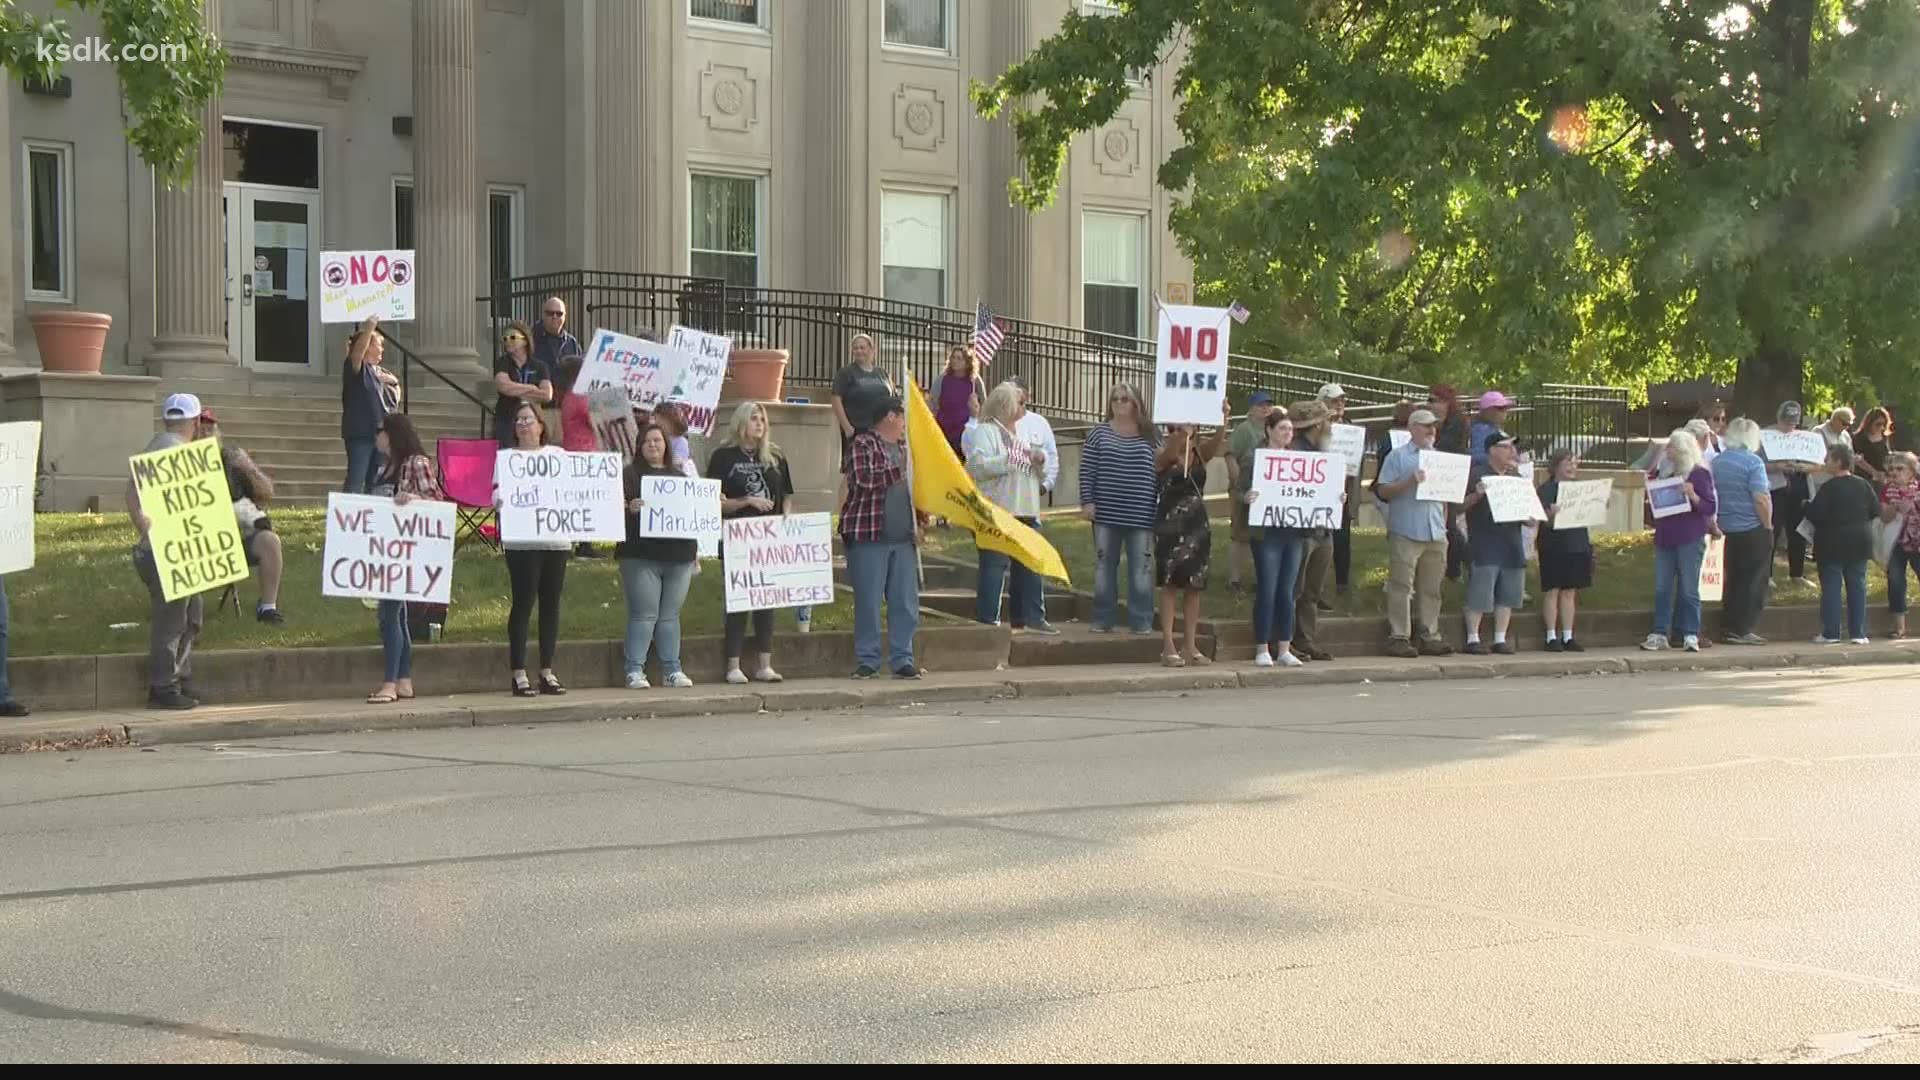 Protesters gathered outside the St. Francois County Government Center in Farmington